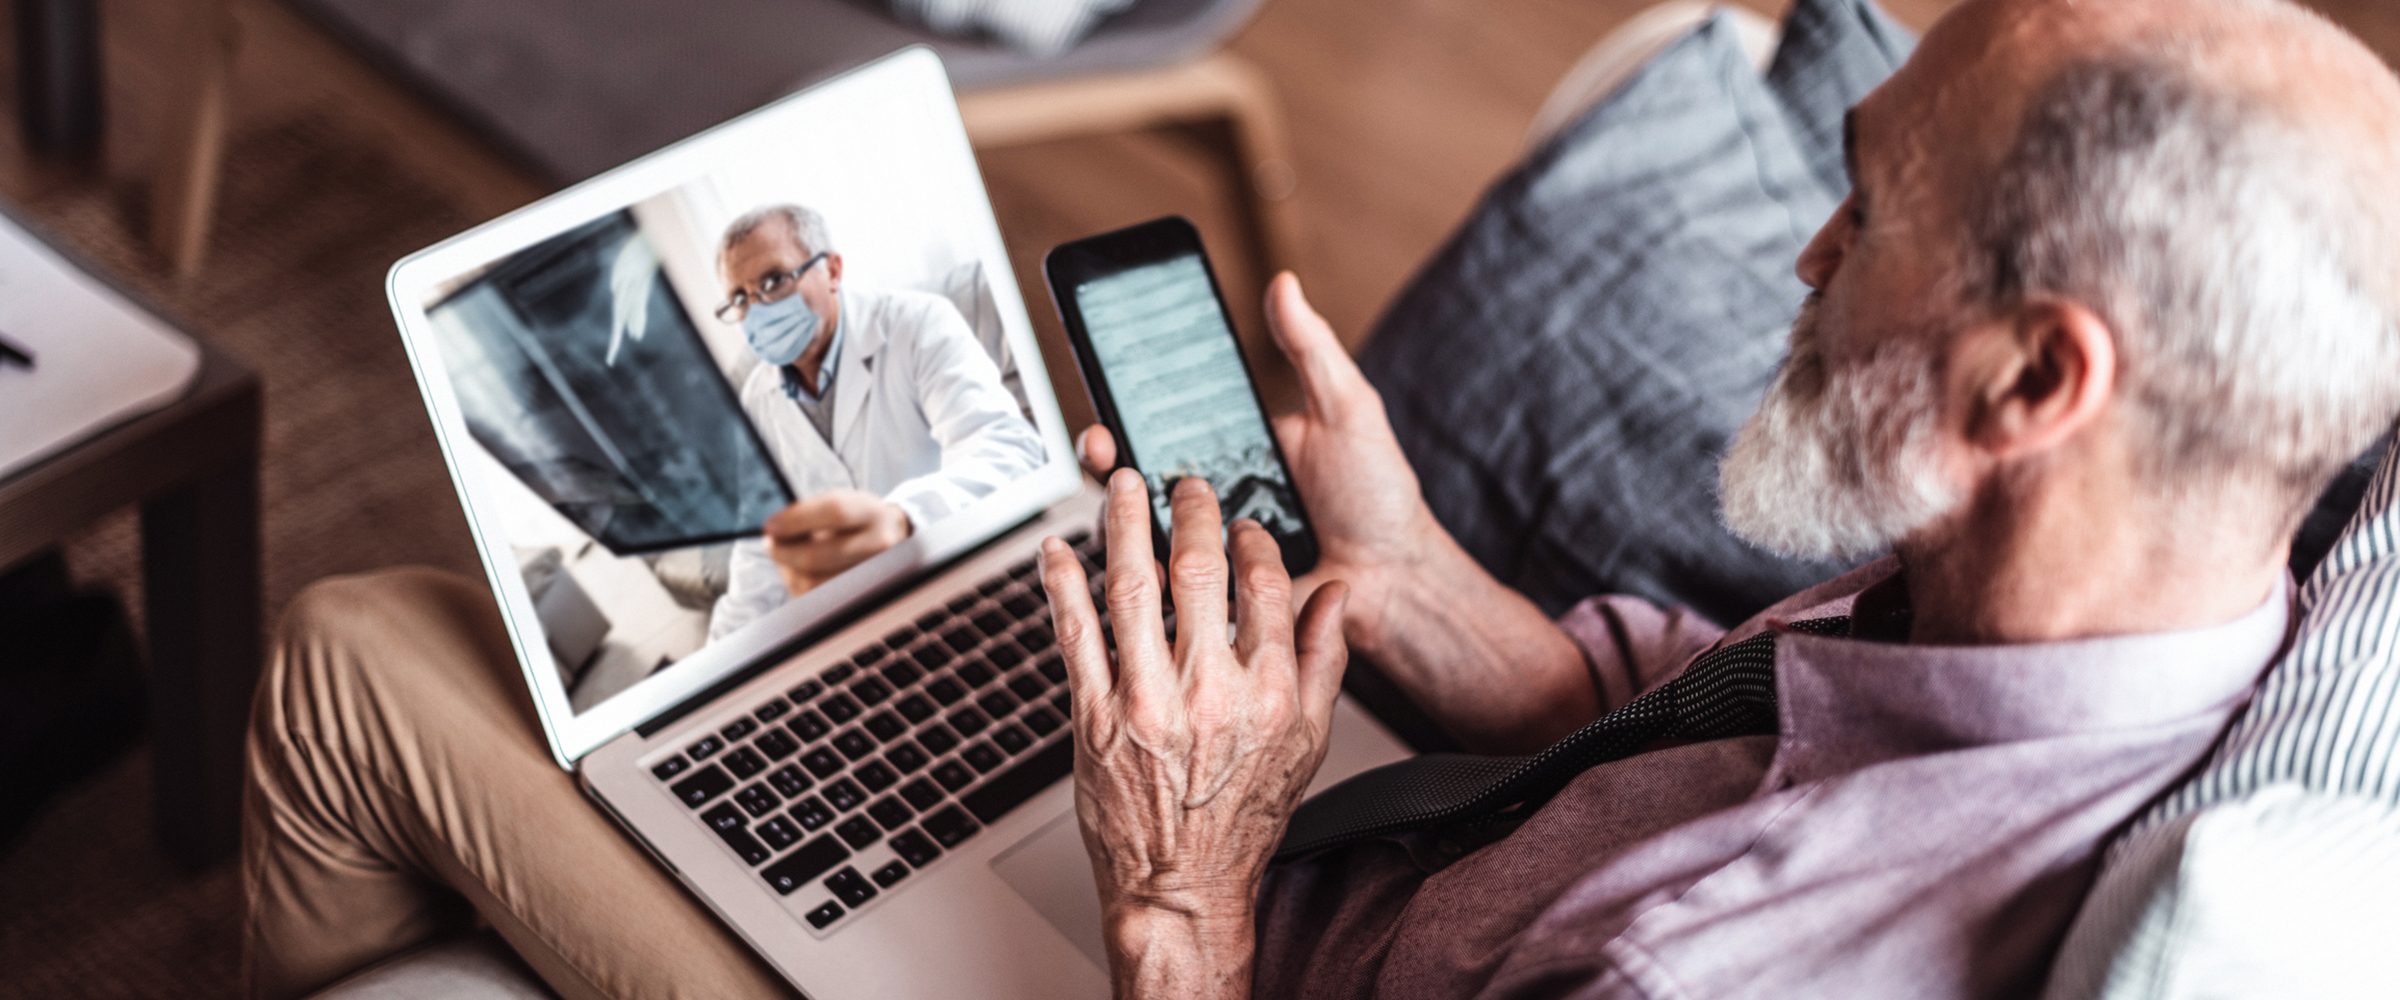 10 Healthcare Marketing Trends for 2022